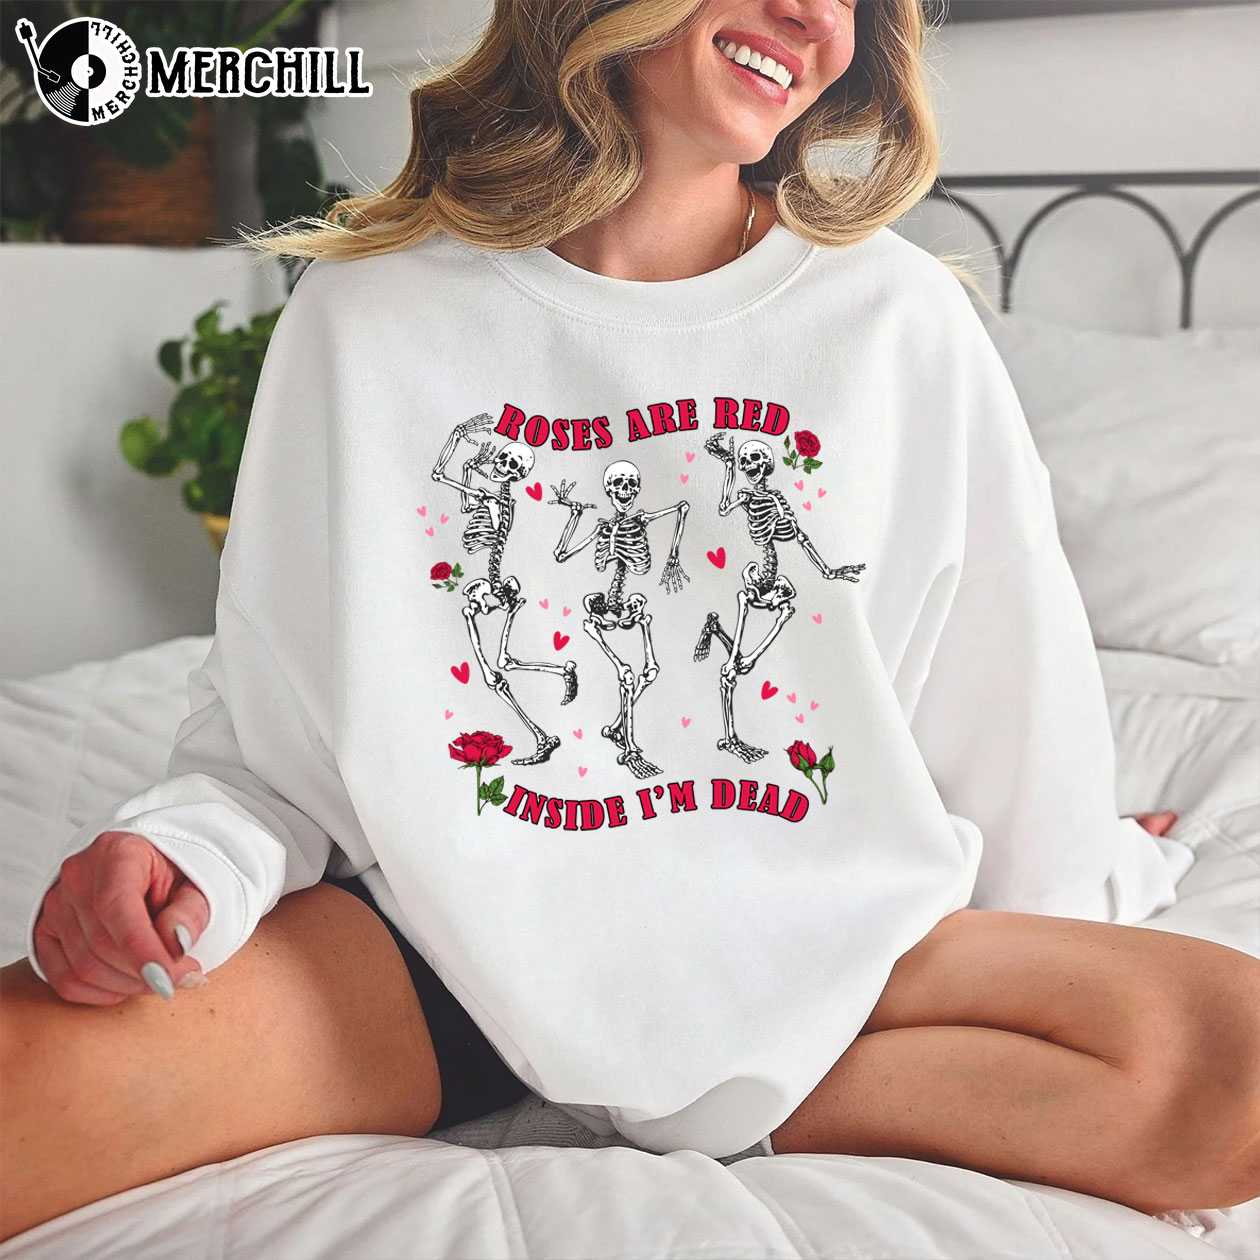 Roses Are Red Inside I'm Dead Funny Valentines Day Shirts for Her - Happy Place for Music Lovers